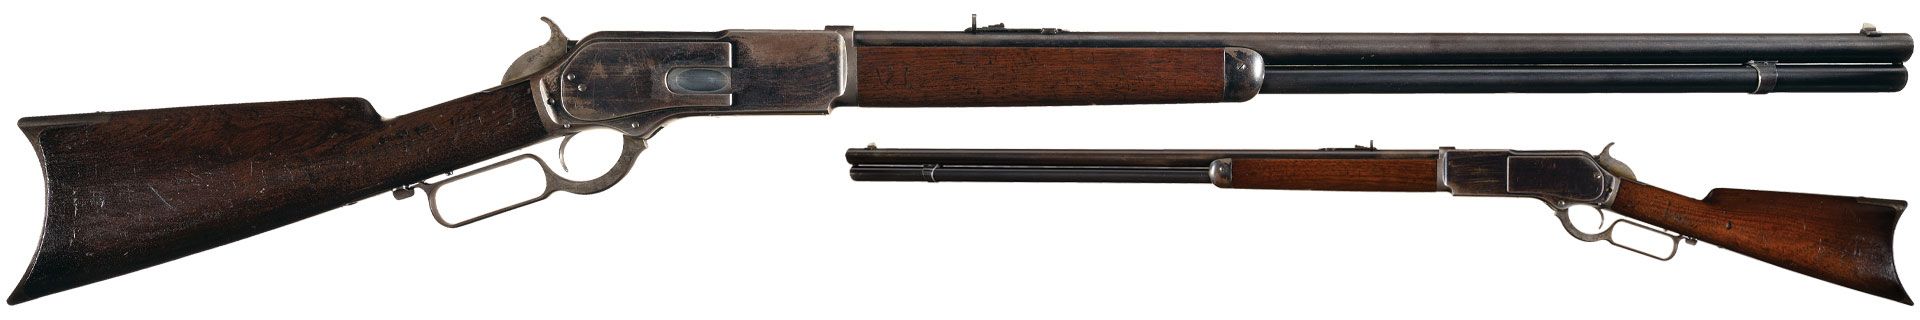 Lot 94: Winchester First Model 1876 "Open Top" Rifle